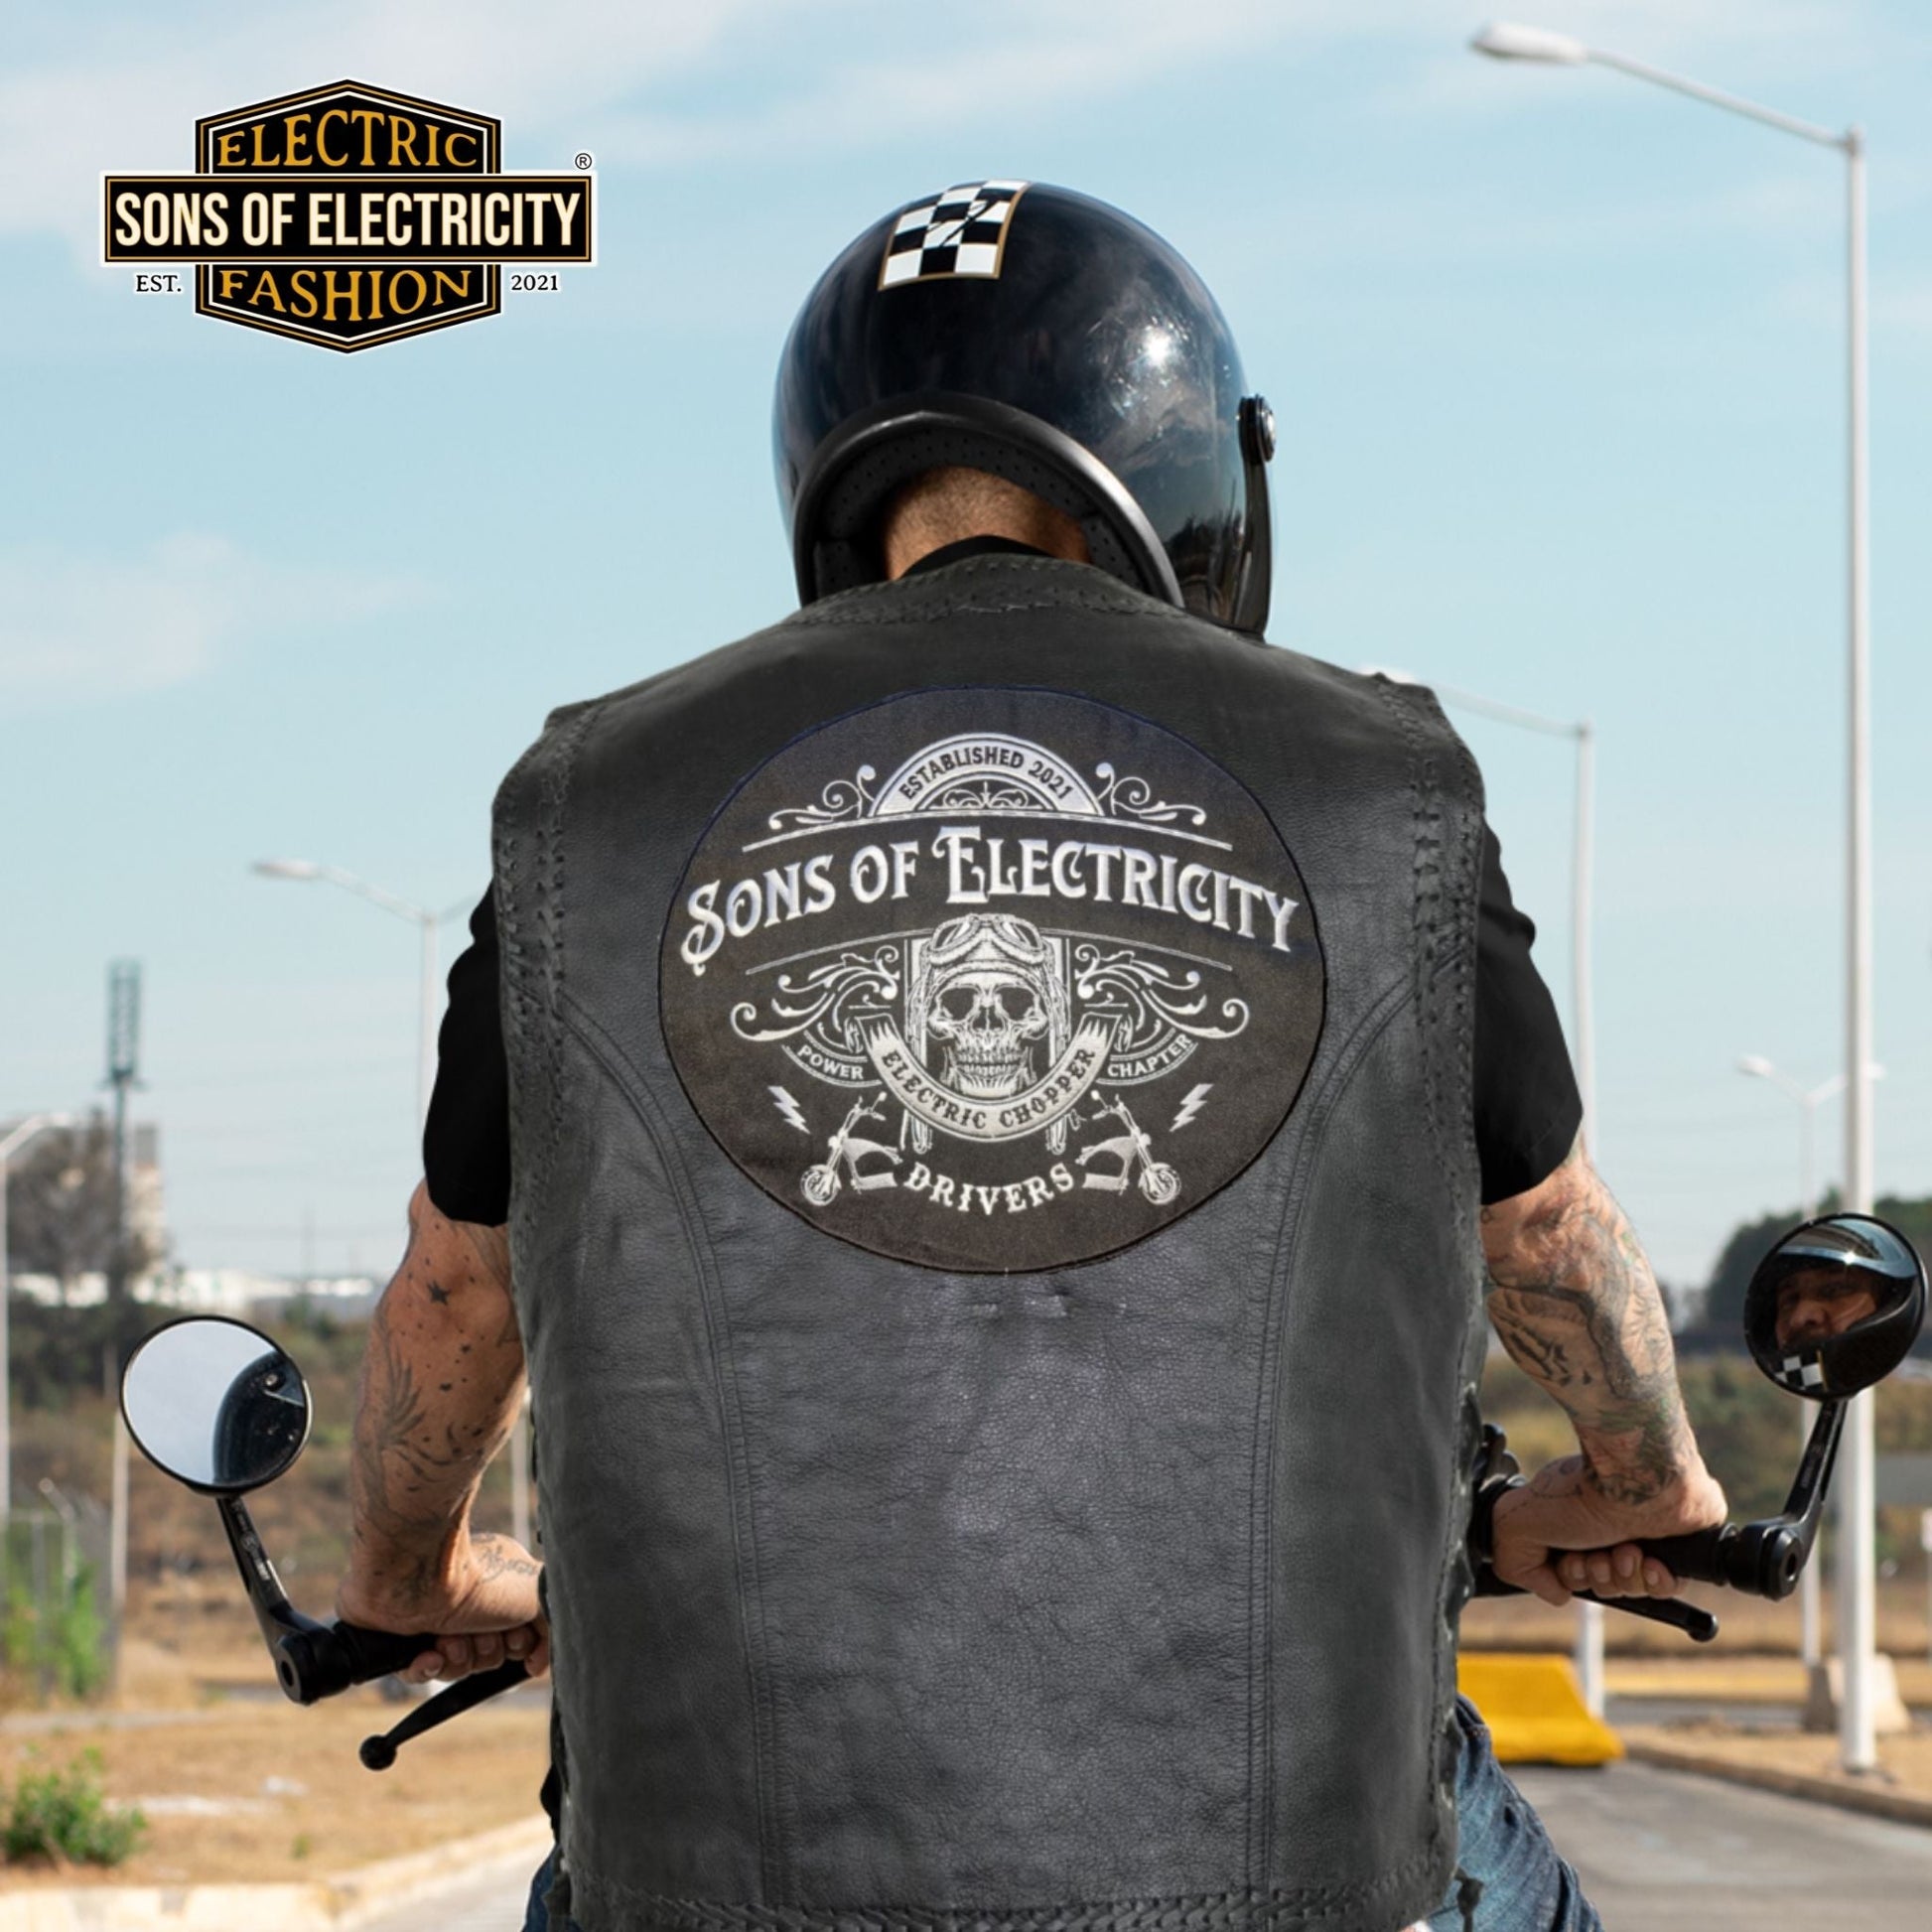 SONS OF ELECTRICITY – Electric Motorbiker Patch / Aufnäher